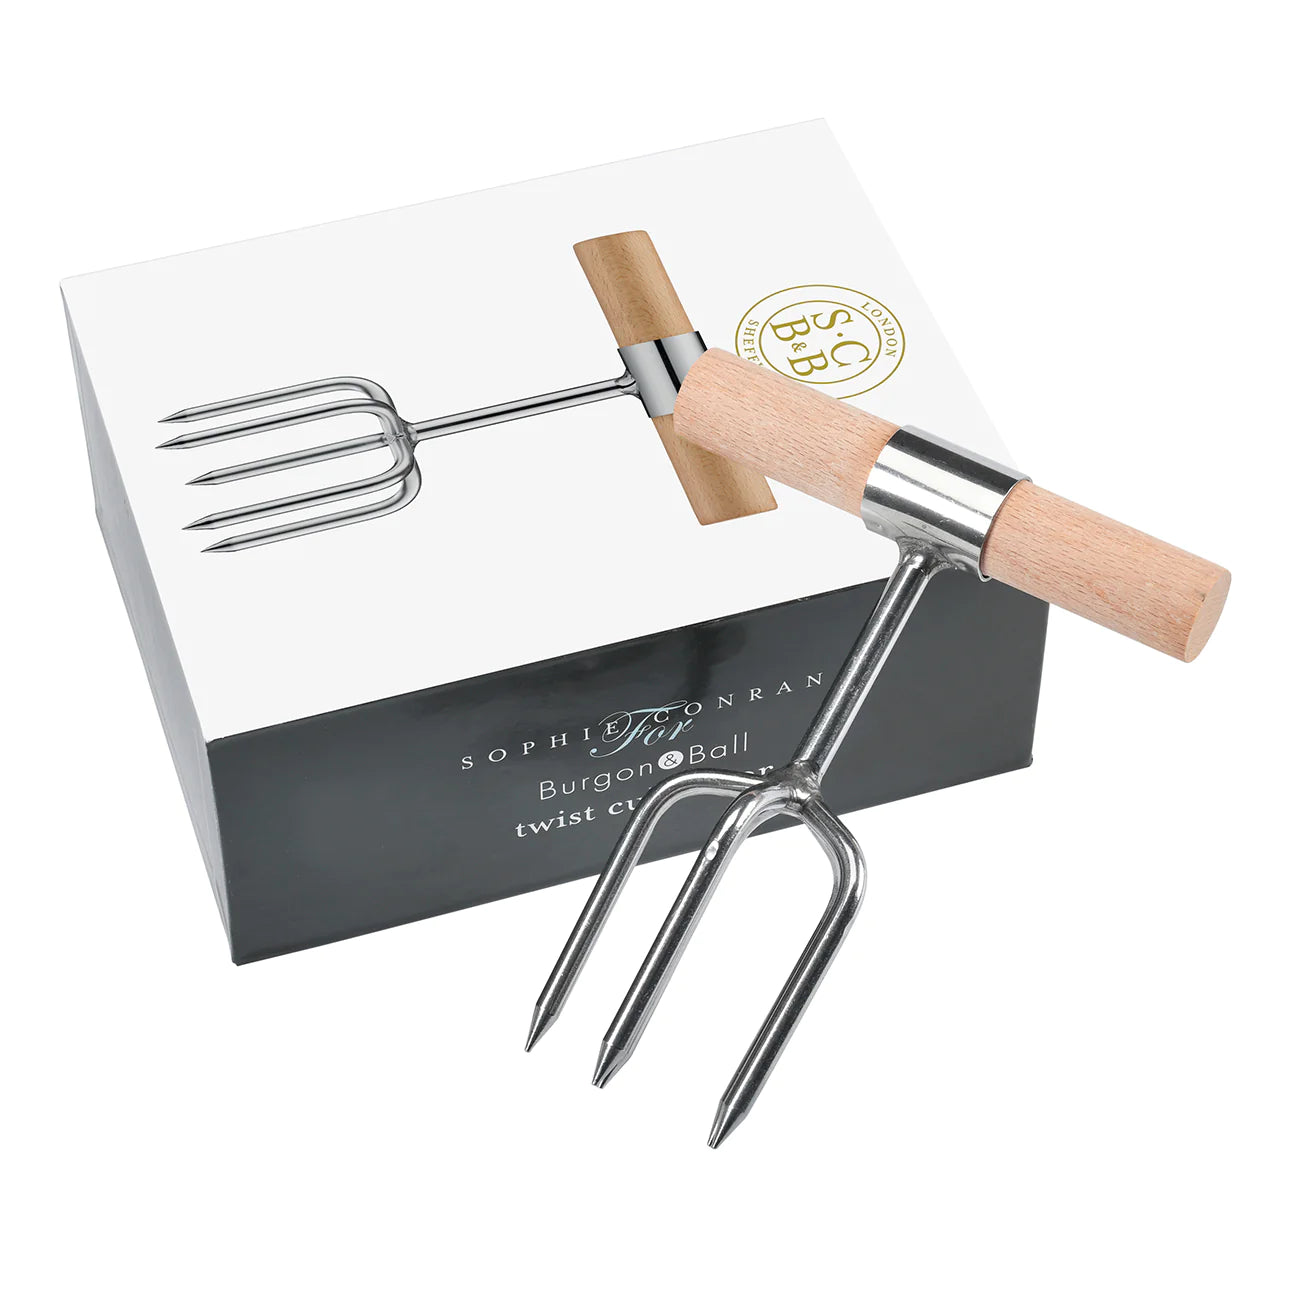 Sophie Conran for Burgon & Ball Twist Cultivator, Gift Boxed